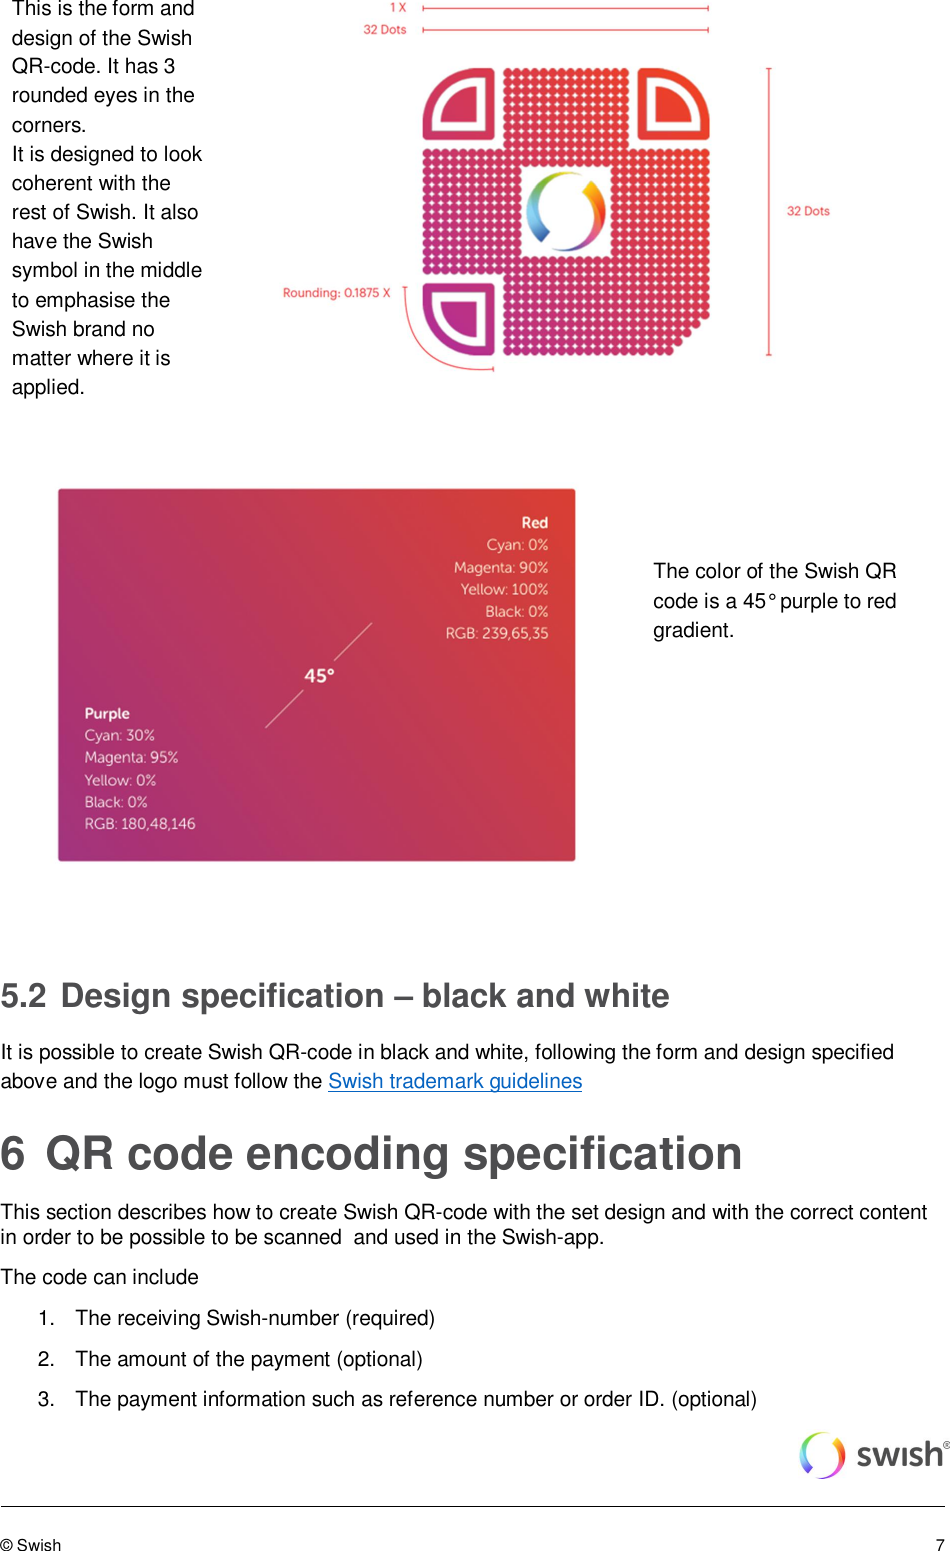 Page 7 of 8 - Guide-Swish-QR-code-design-specification V1.5